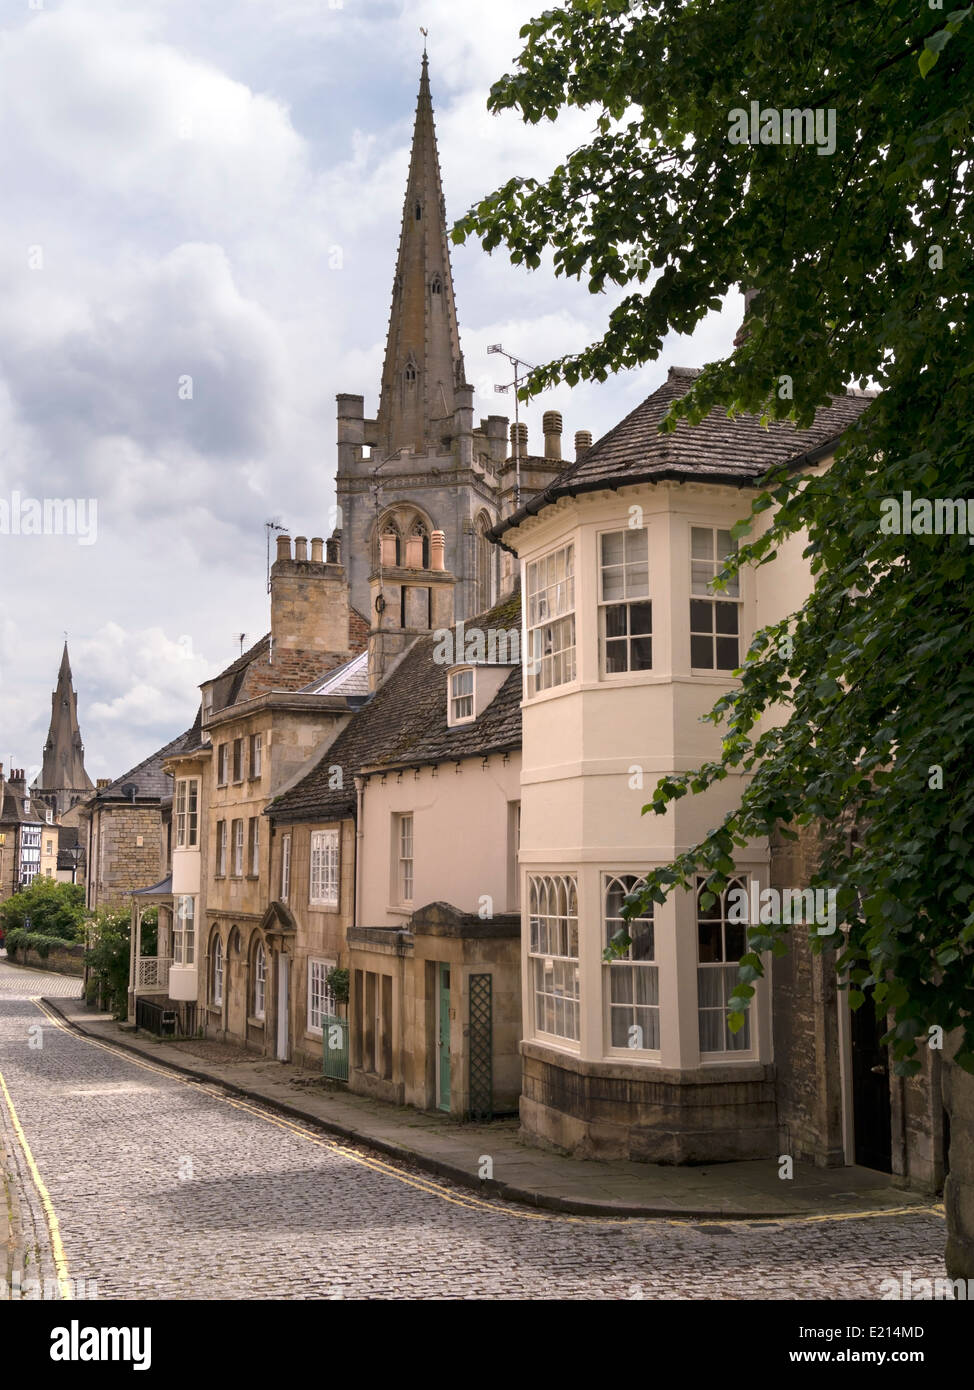 Old narrow cobbled street, stone houses and All Saints & St Mary's Church Spires, Barn Hill, Stamford, Lincolnshire, England, UK Stock Photo